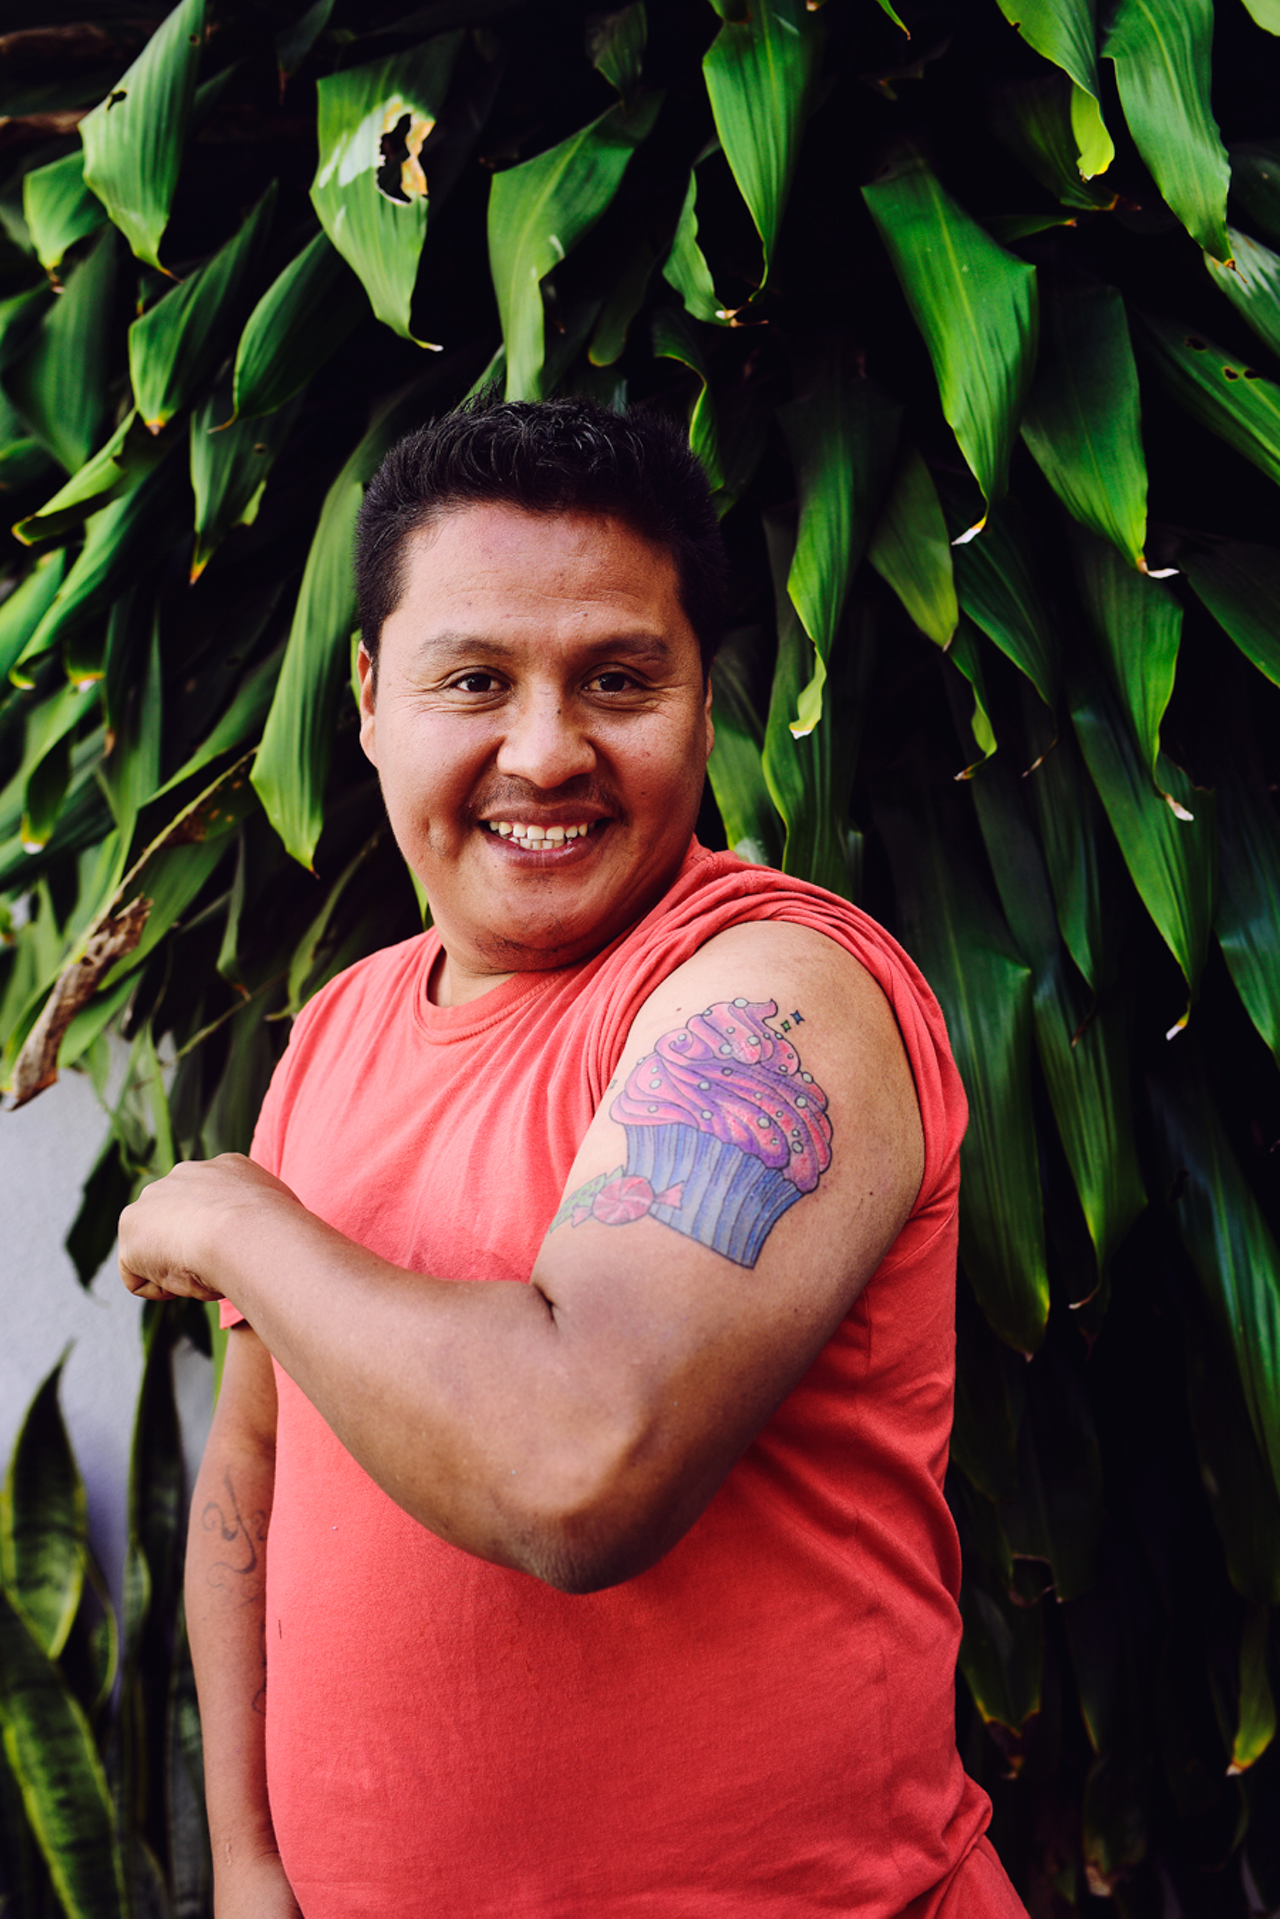 “Niki did Luis’ tattoo,” Becki says. “He was one of Fito’s crew still surviving from Zone 3. He left the gang and became a baker, and he sells pastries and candy on public transportation. He wanted to get his MS-13 tattoo covered up with a cupcake. Like a colorful cupcake — a pink and purple cupcake. Because he sells his pastries and candy on the bus, he always had to wear long-sleeve shirts because buses go throughout town and it’s dangerous for him to have a visible gang tattoo.”